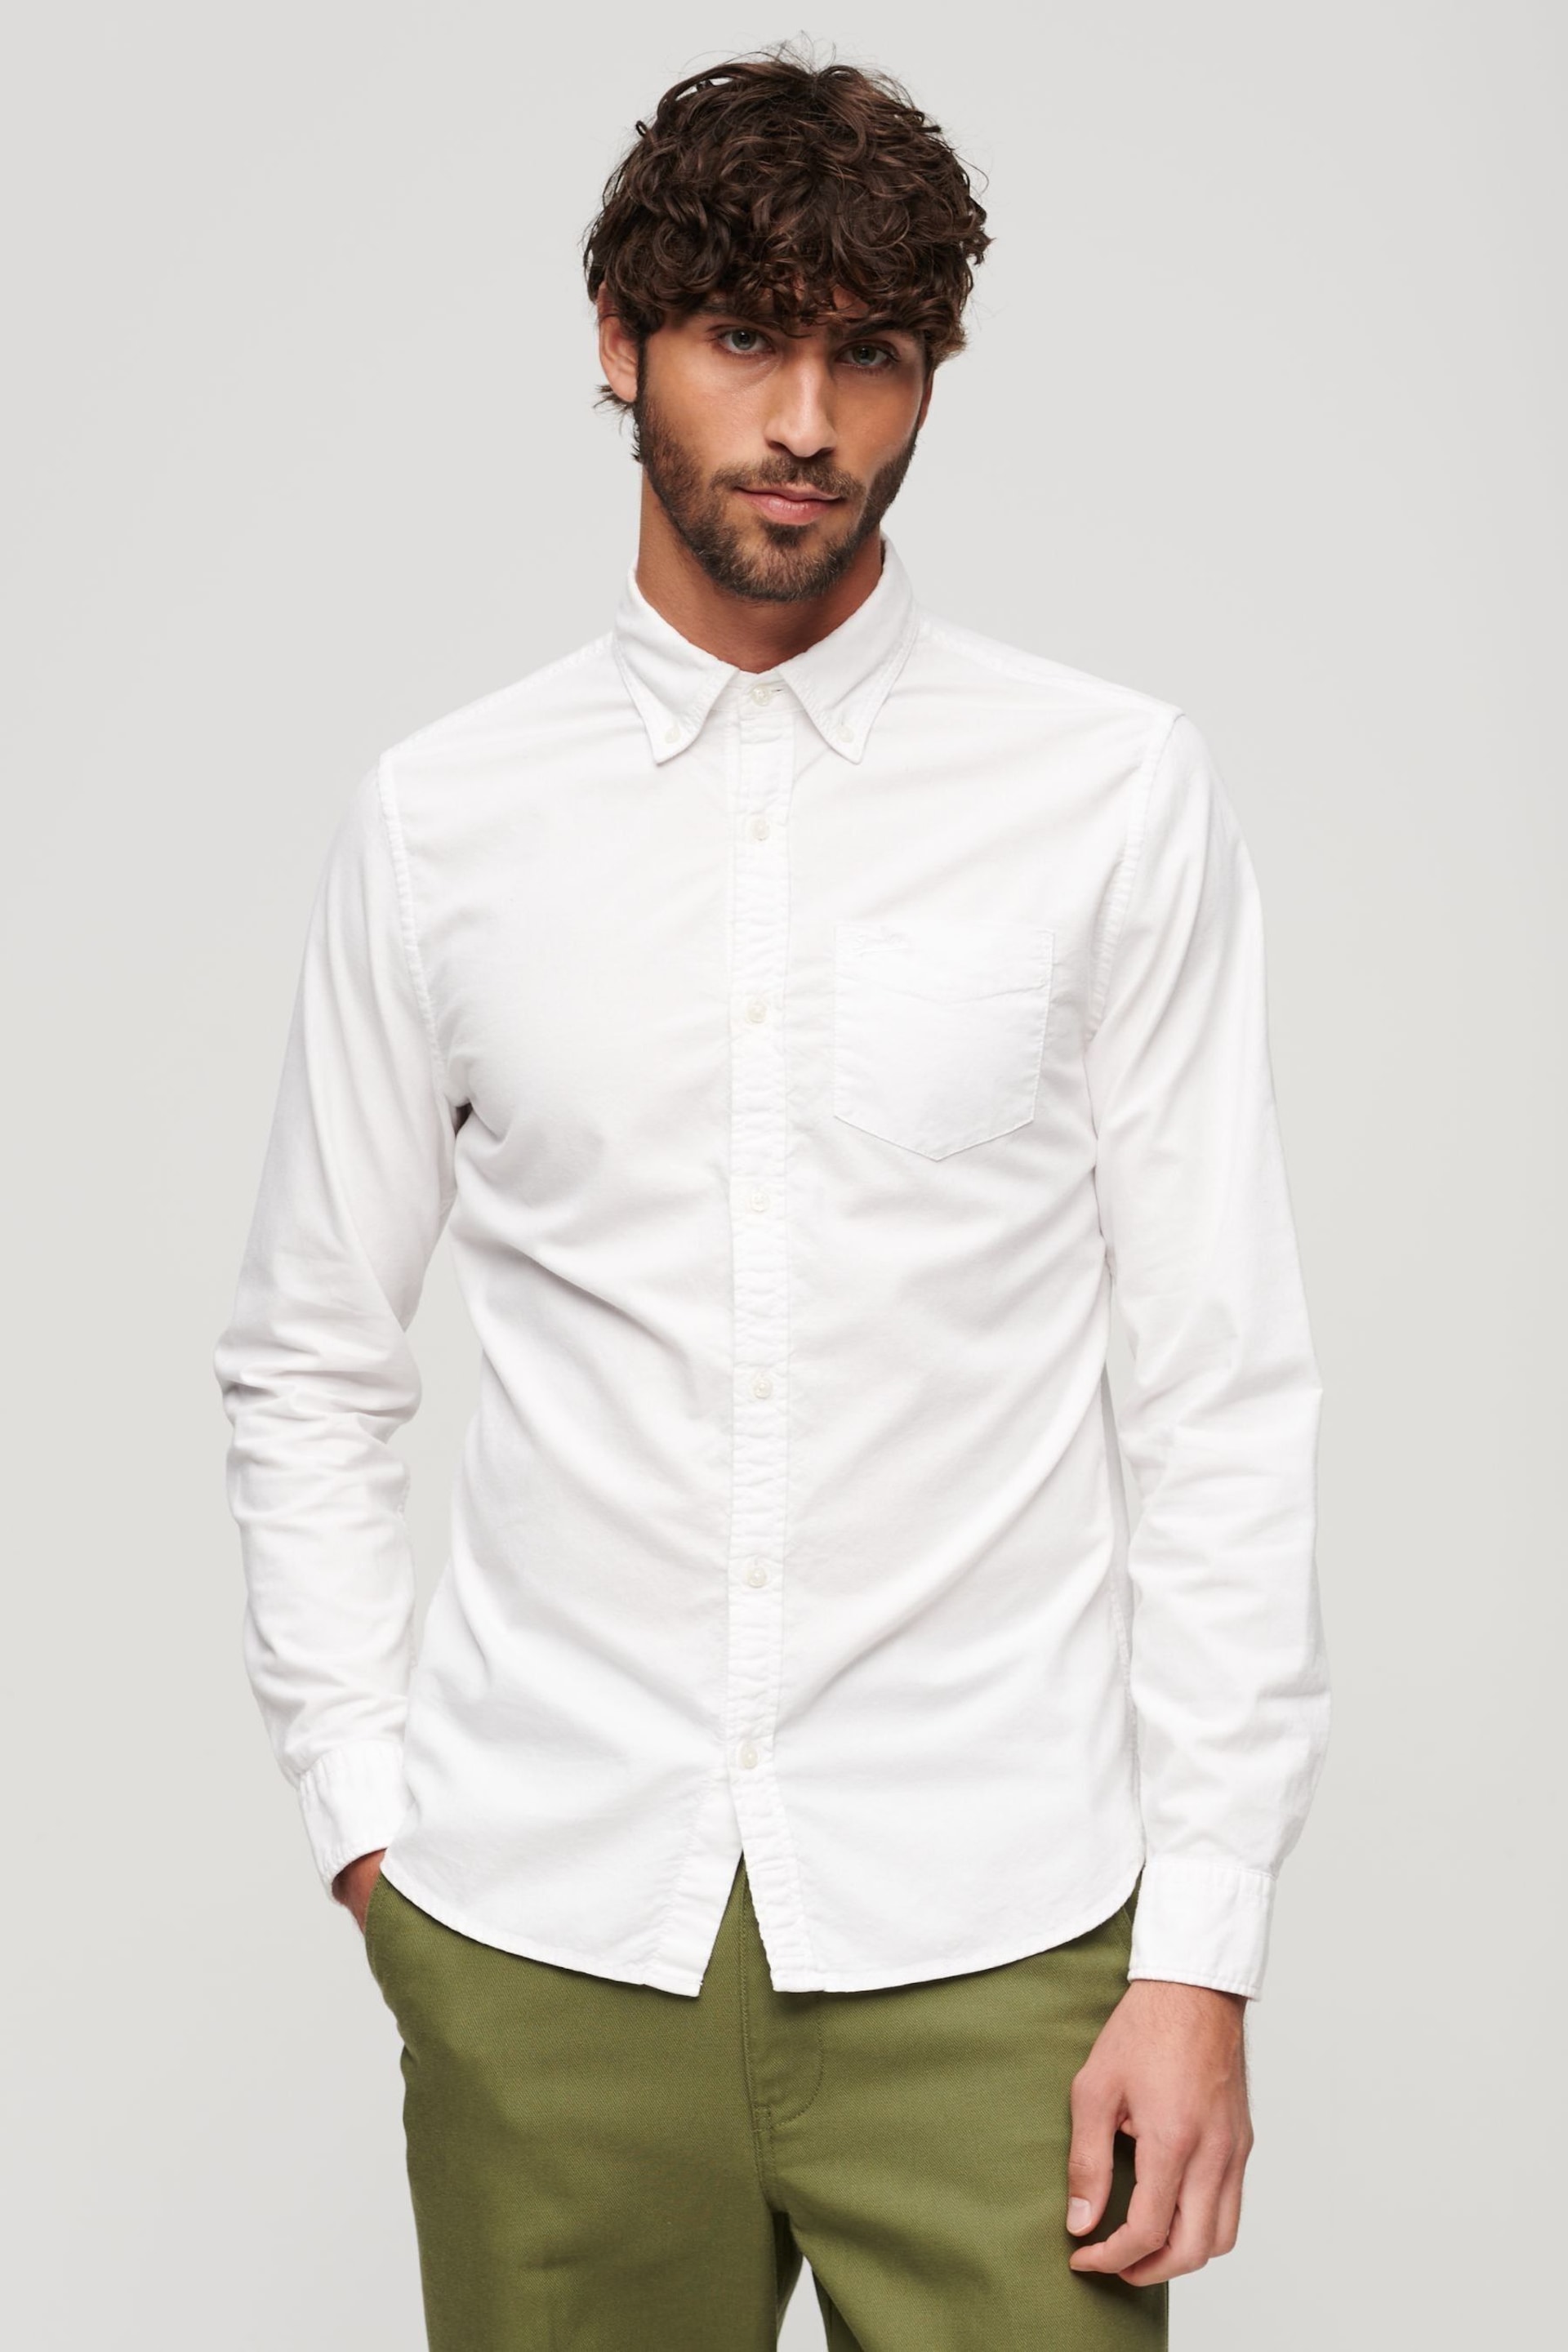 Superdry White Cotton Long Sleeved Oxford Shirt - Image 1 of 6